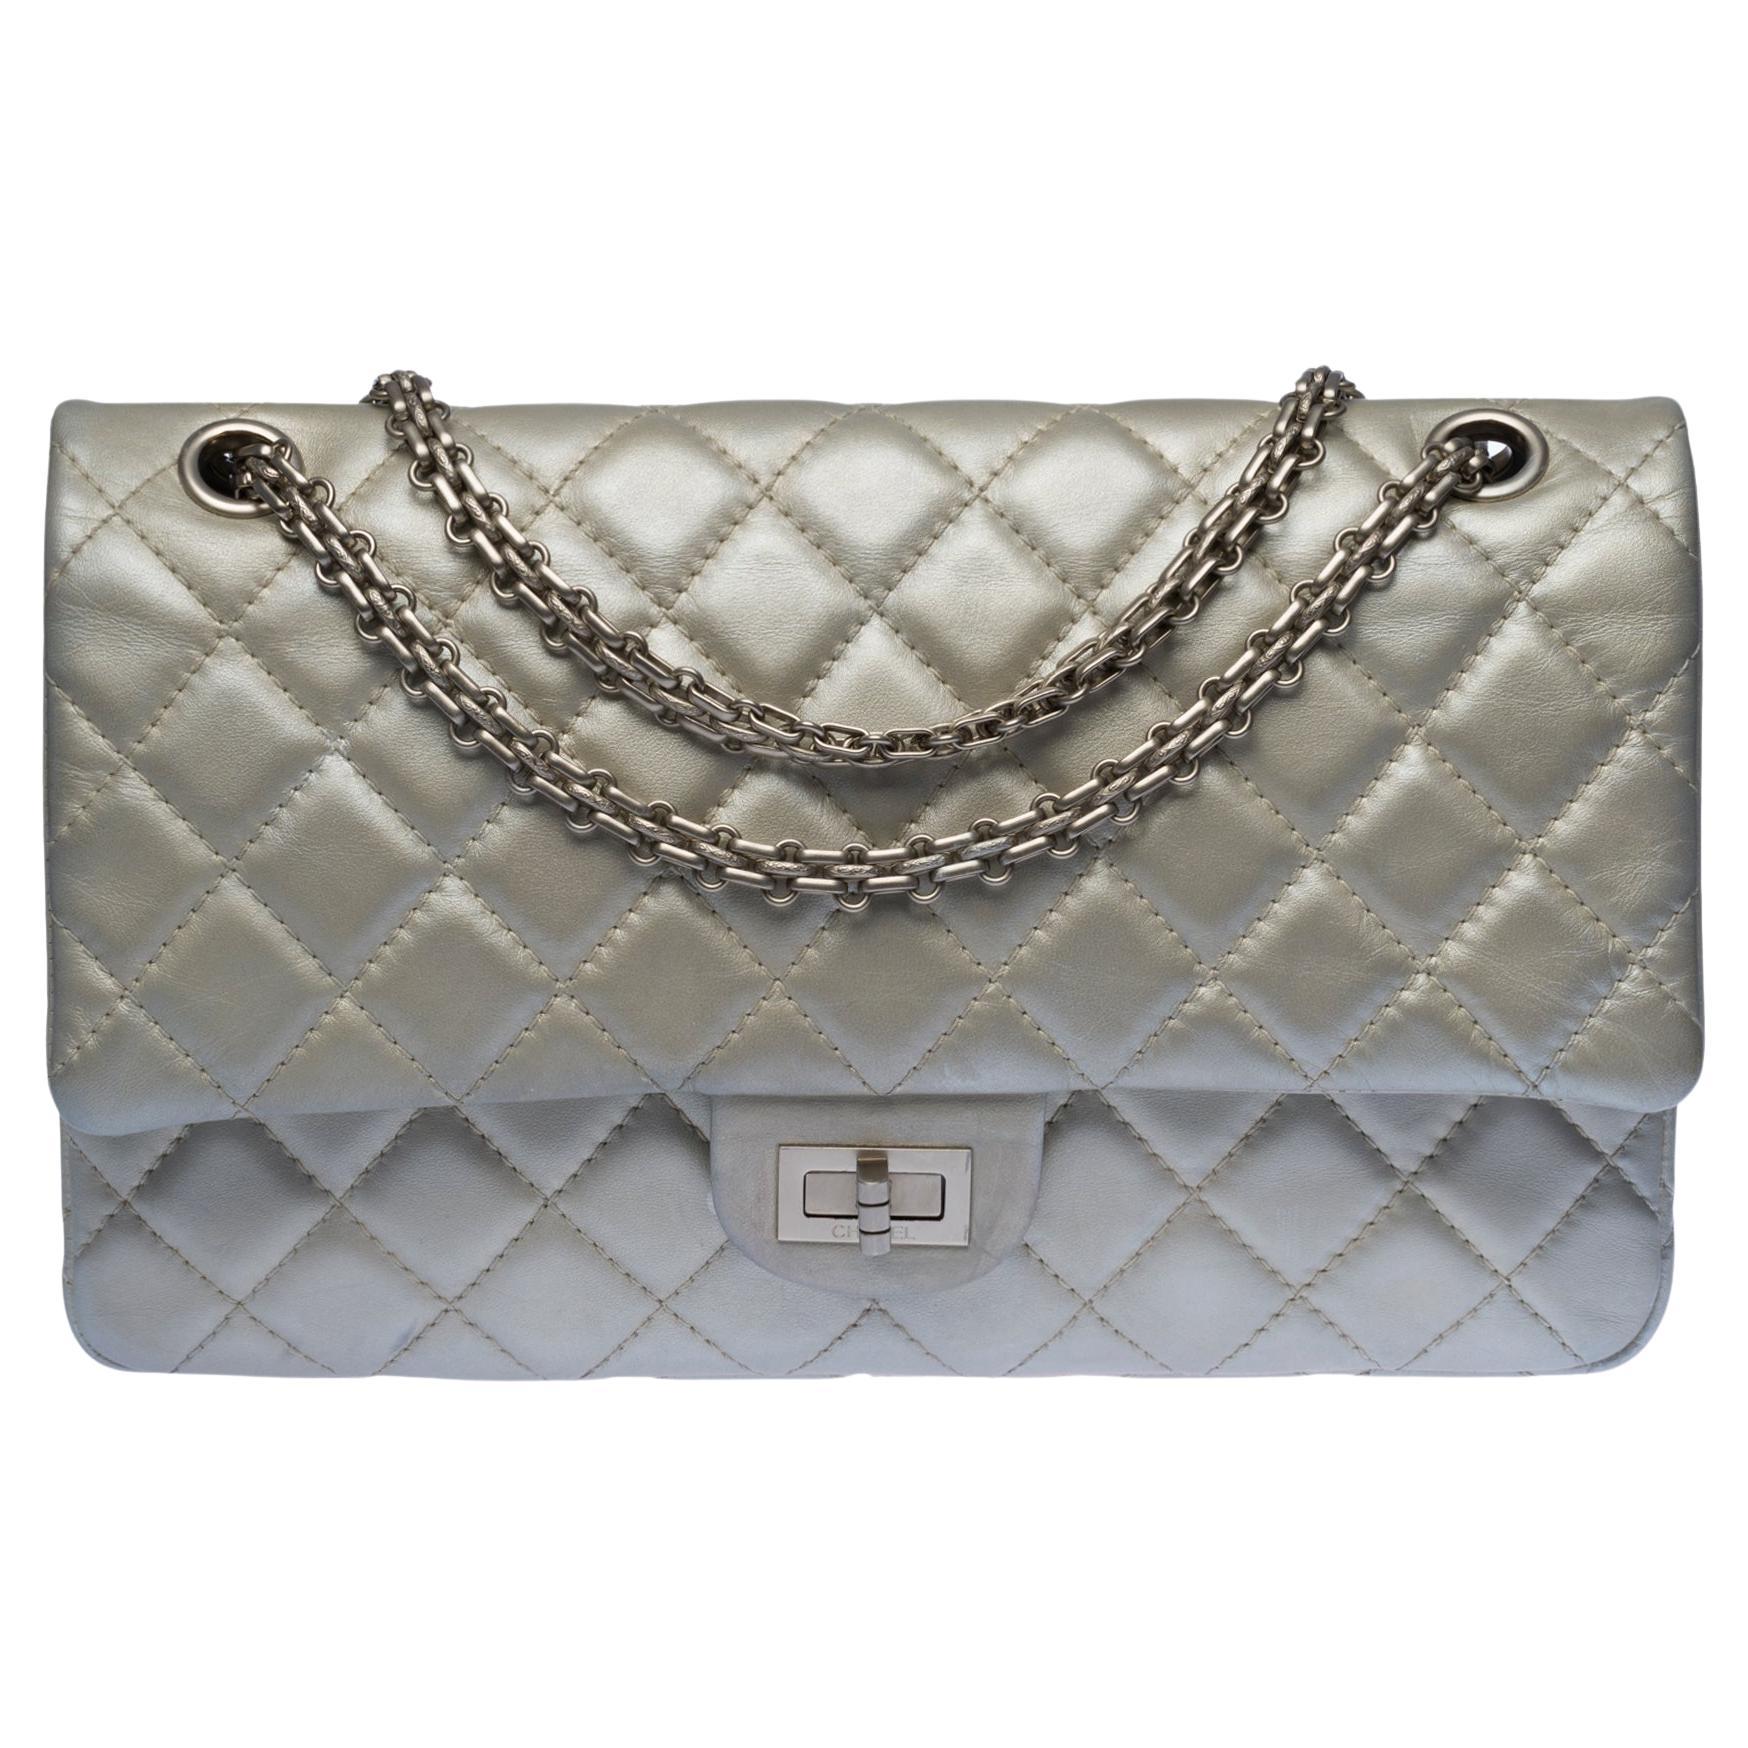 Gorgeous Chanel 2.55 double flap shoulder bag in silver quilted leather, SHW For Sale